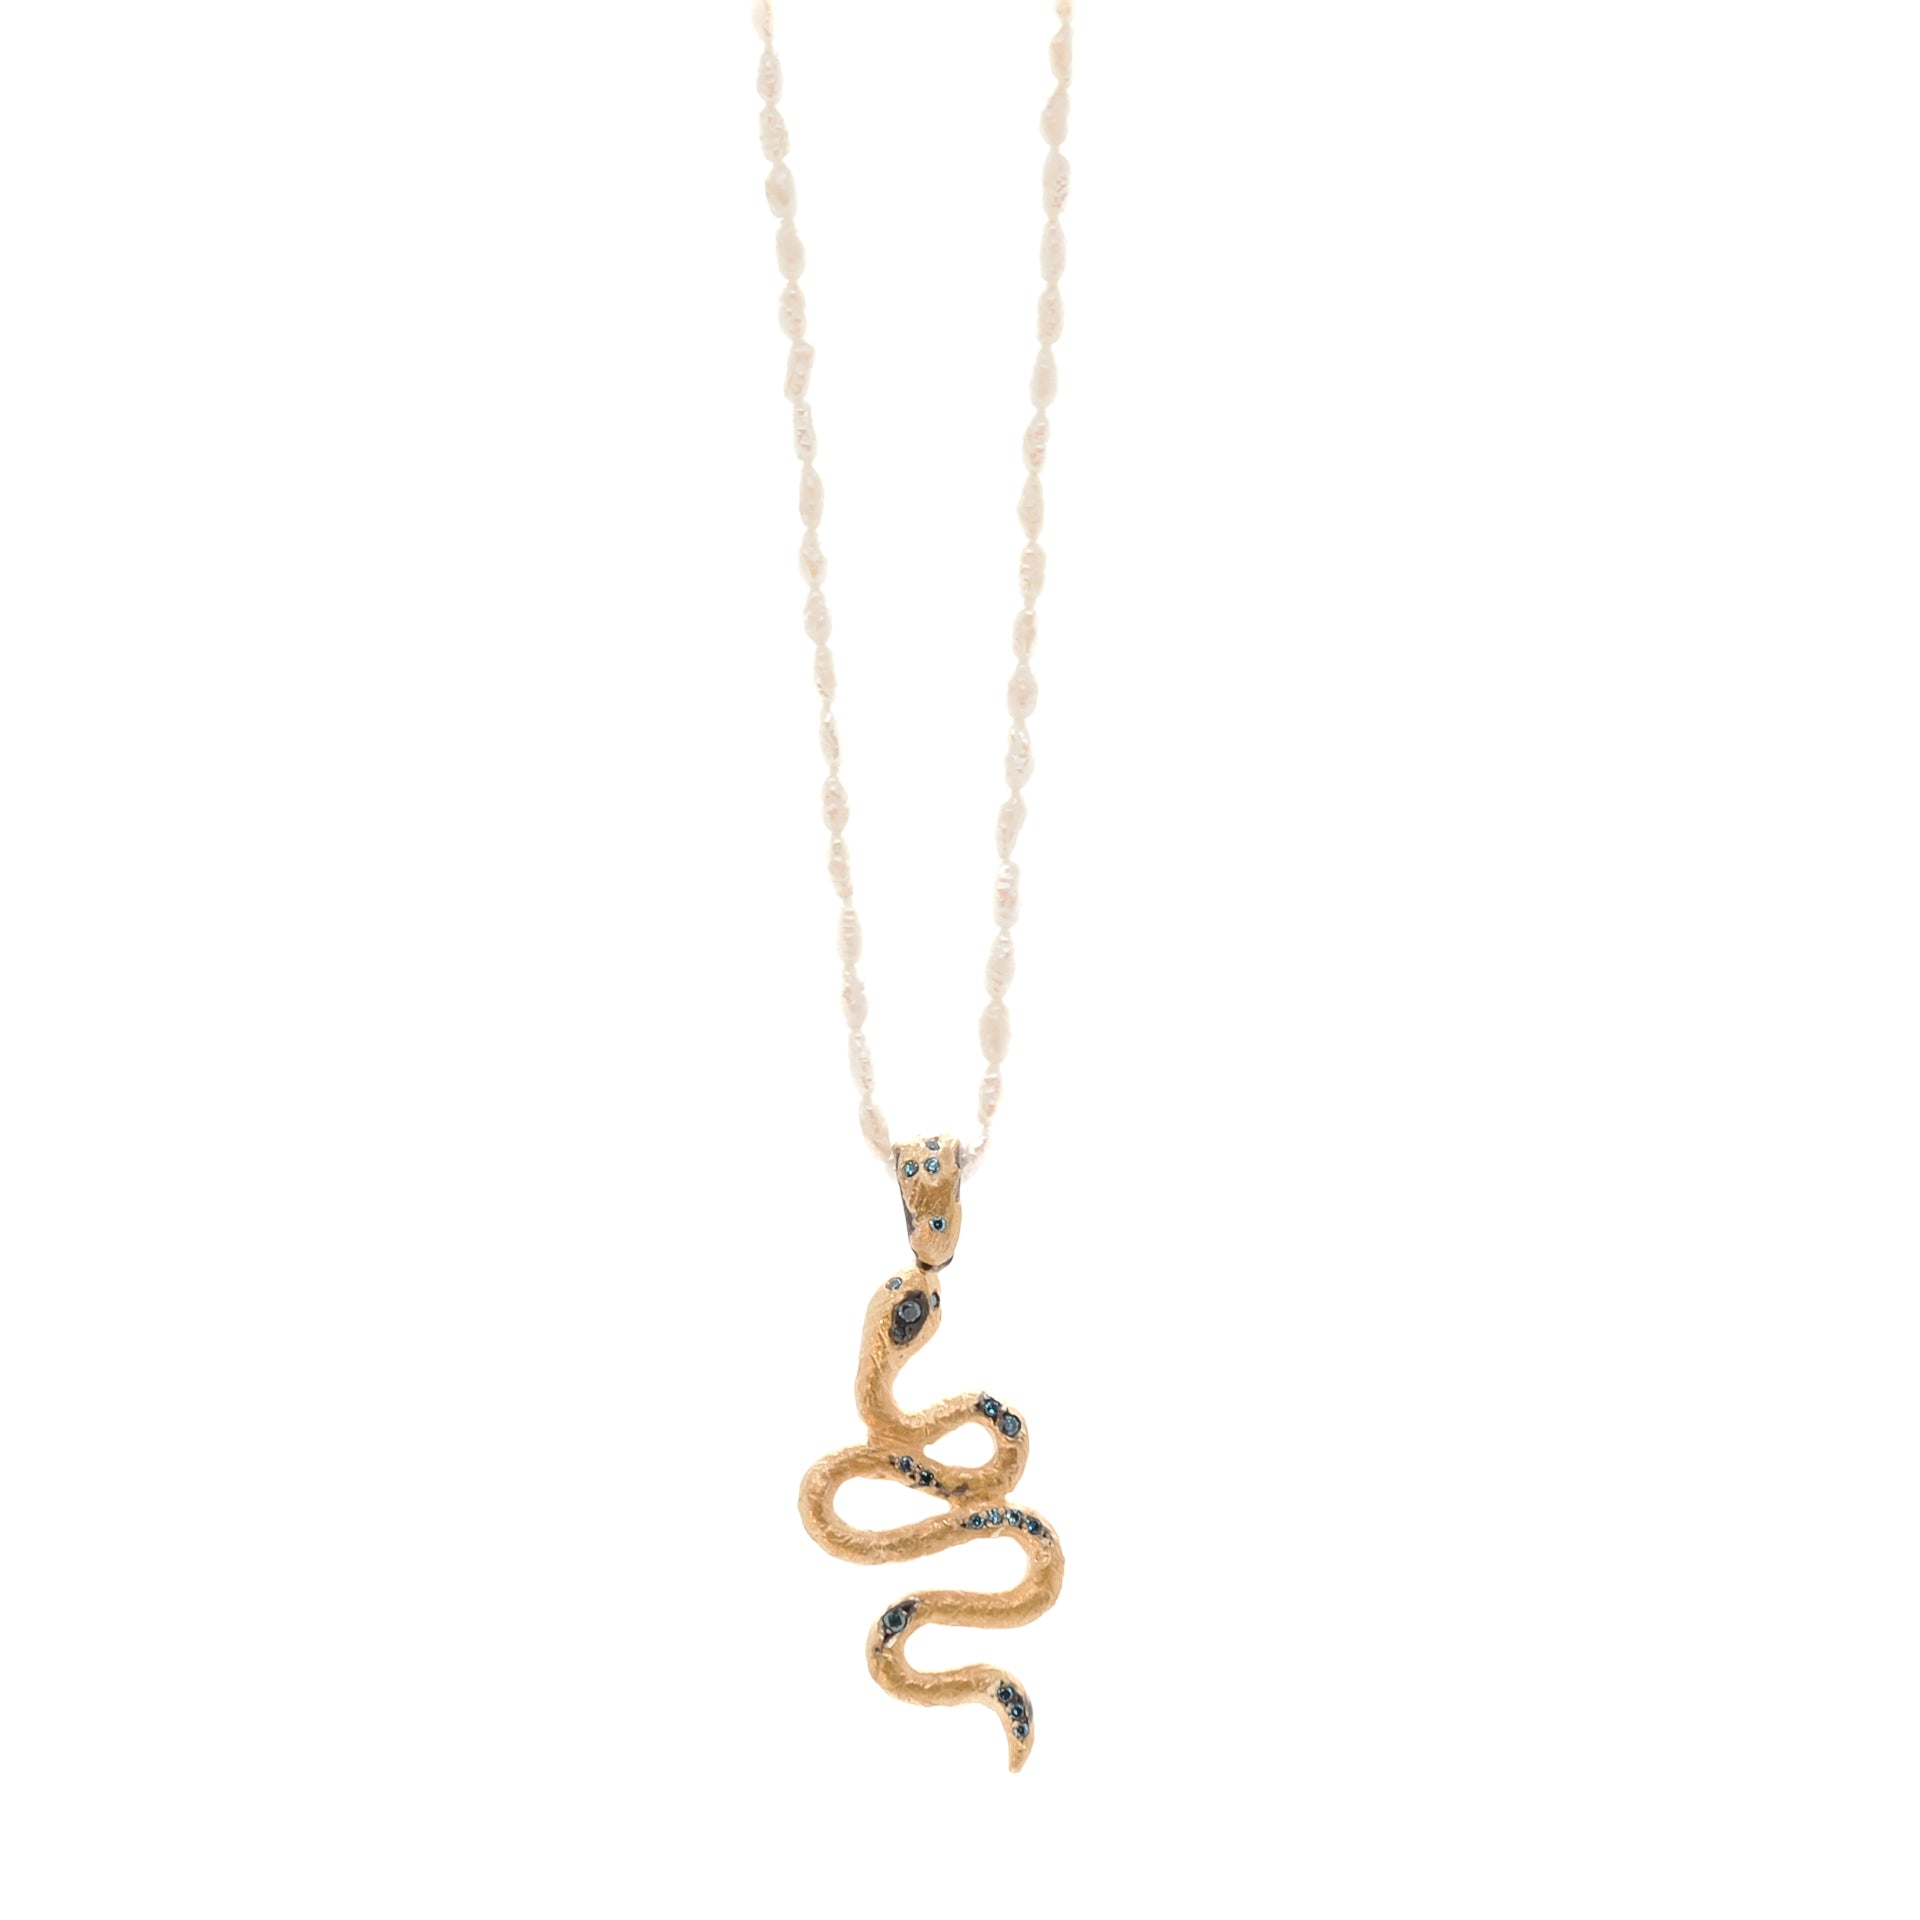 Nature Snake Necklace featuring a stunning snake pendant crafted with 21k gold over silver surface and adorned with 0.55 carats of petroleum diamonds.